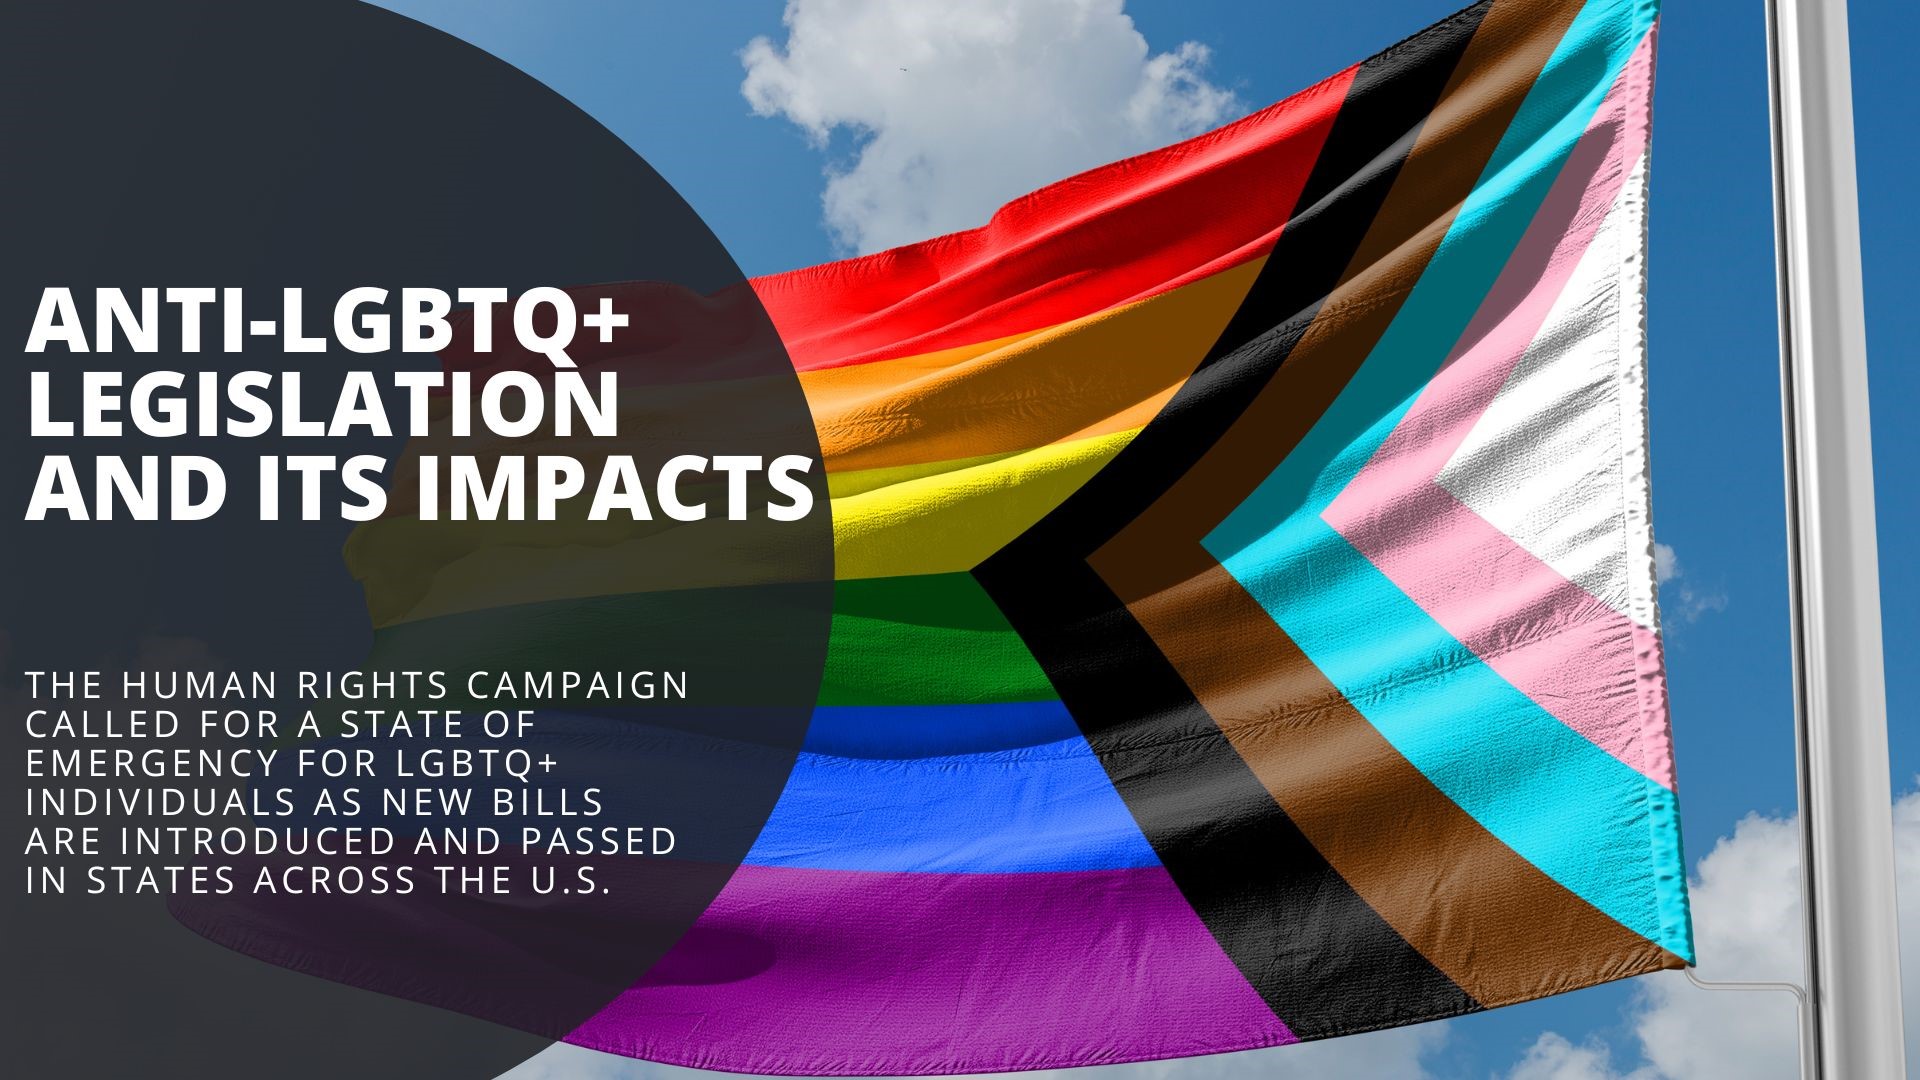 The Human Rights Campaign called for a state of emergency for LGBTQ+ individuals as new bills are introduced and passed in states across the U.S., limiting rights.